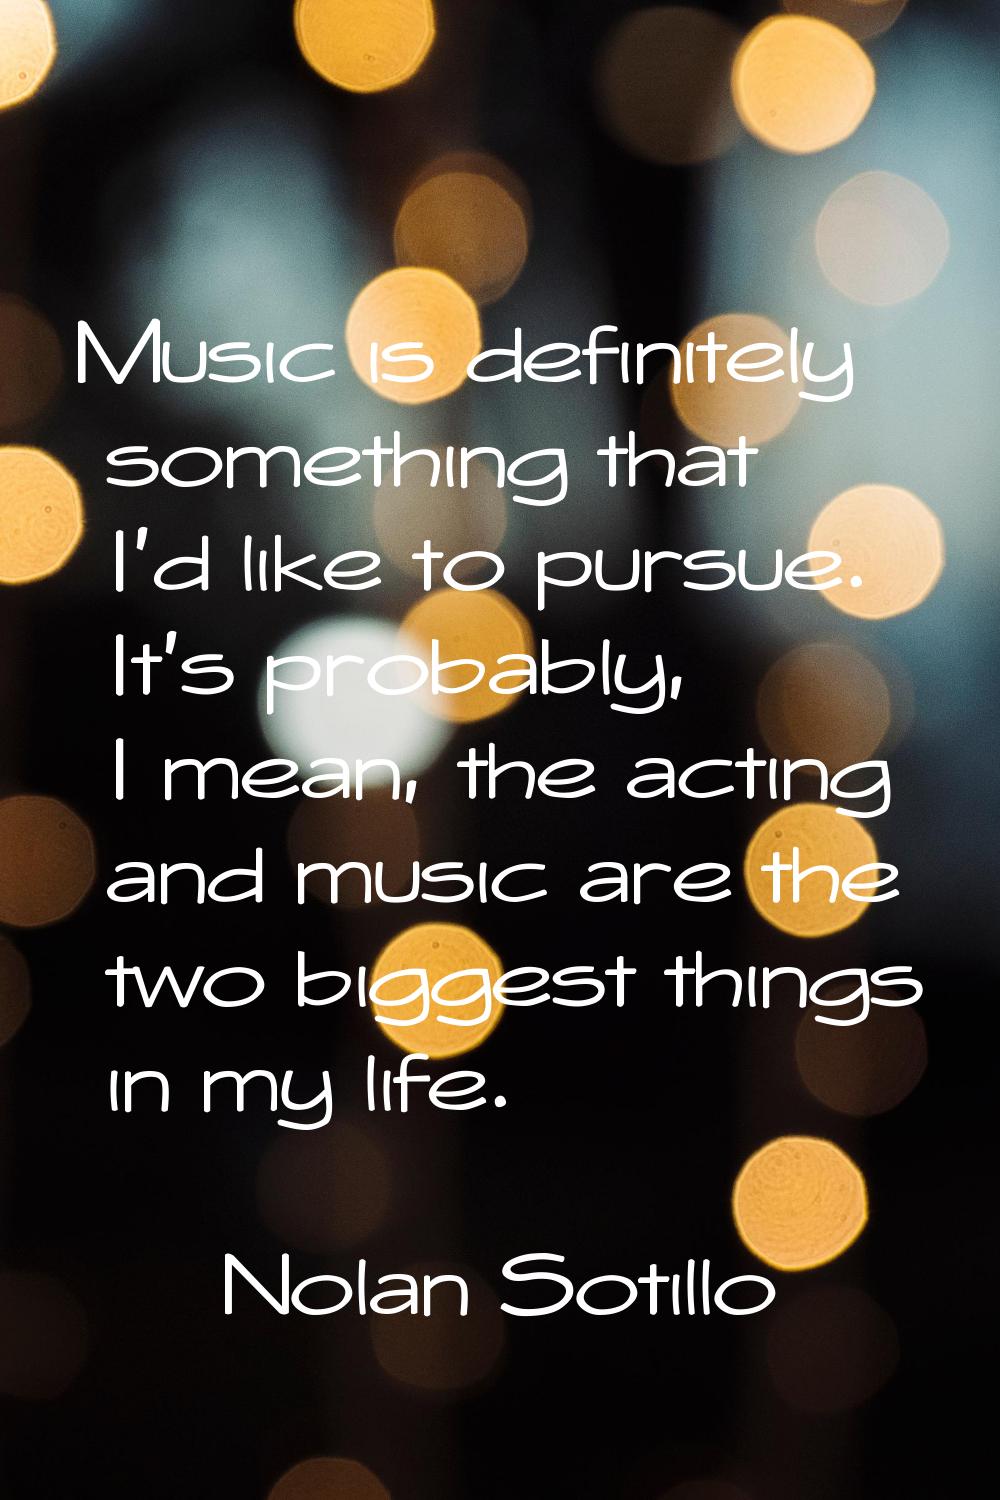 Music is definitely something that I'd like to pursue. It's probably, I mean, the acting and music 